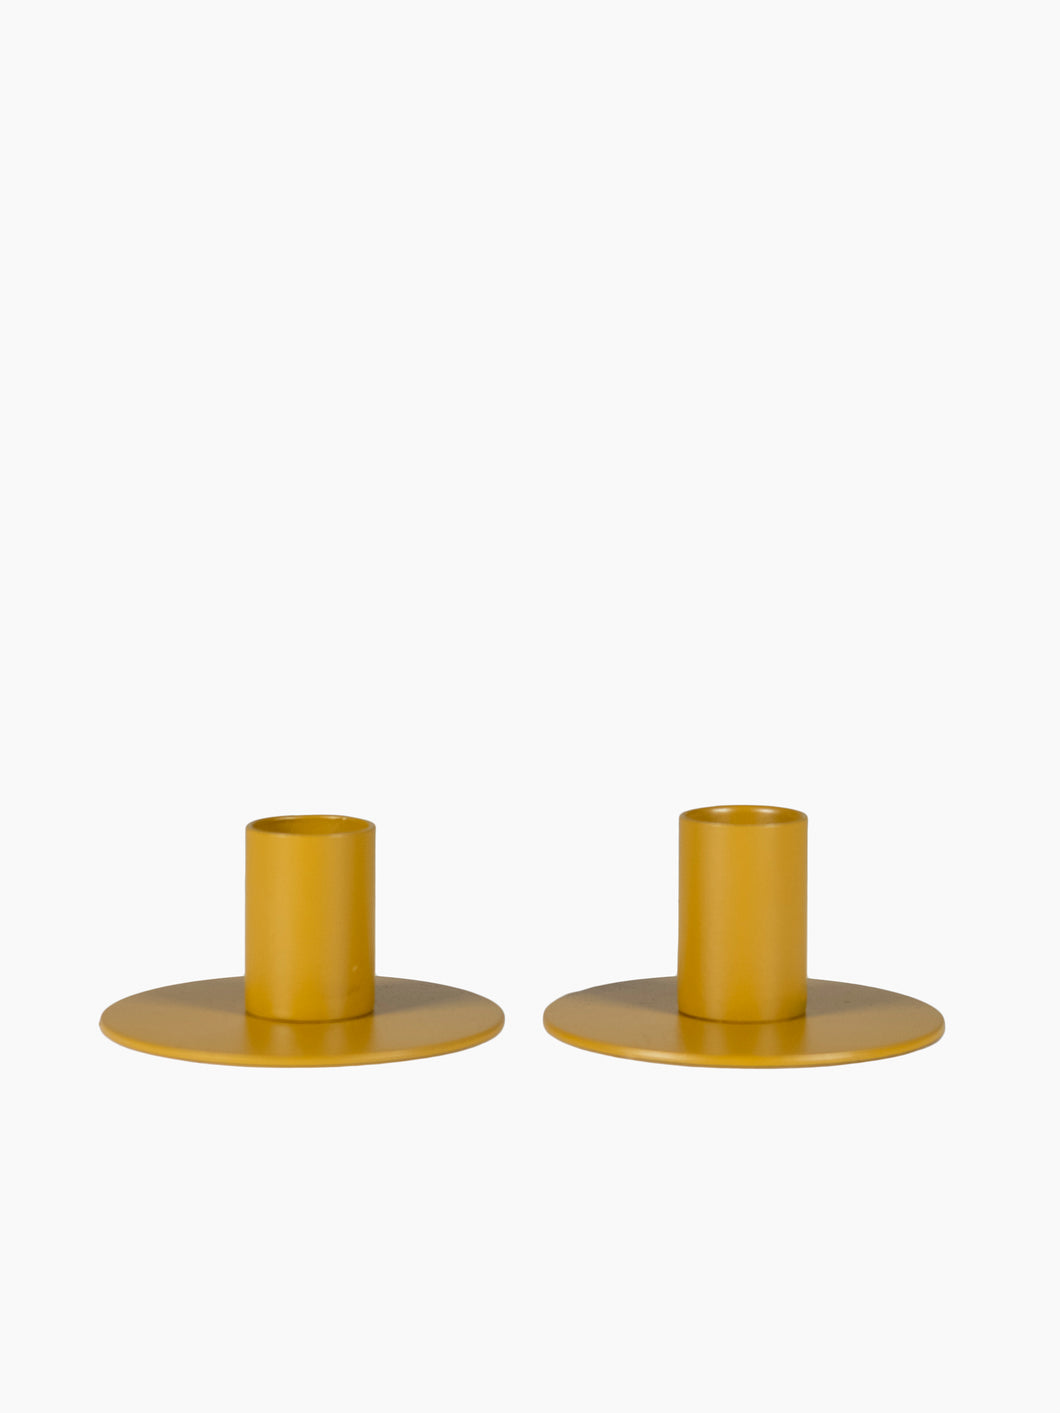 Mustard Metal Candle Holders, Set of 2